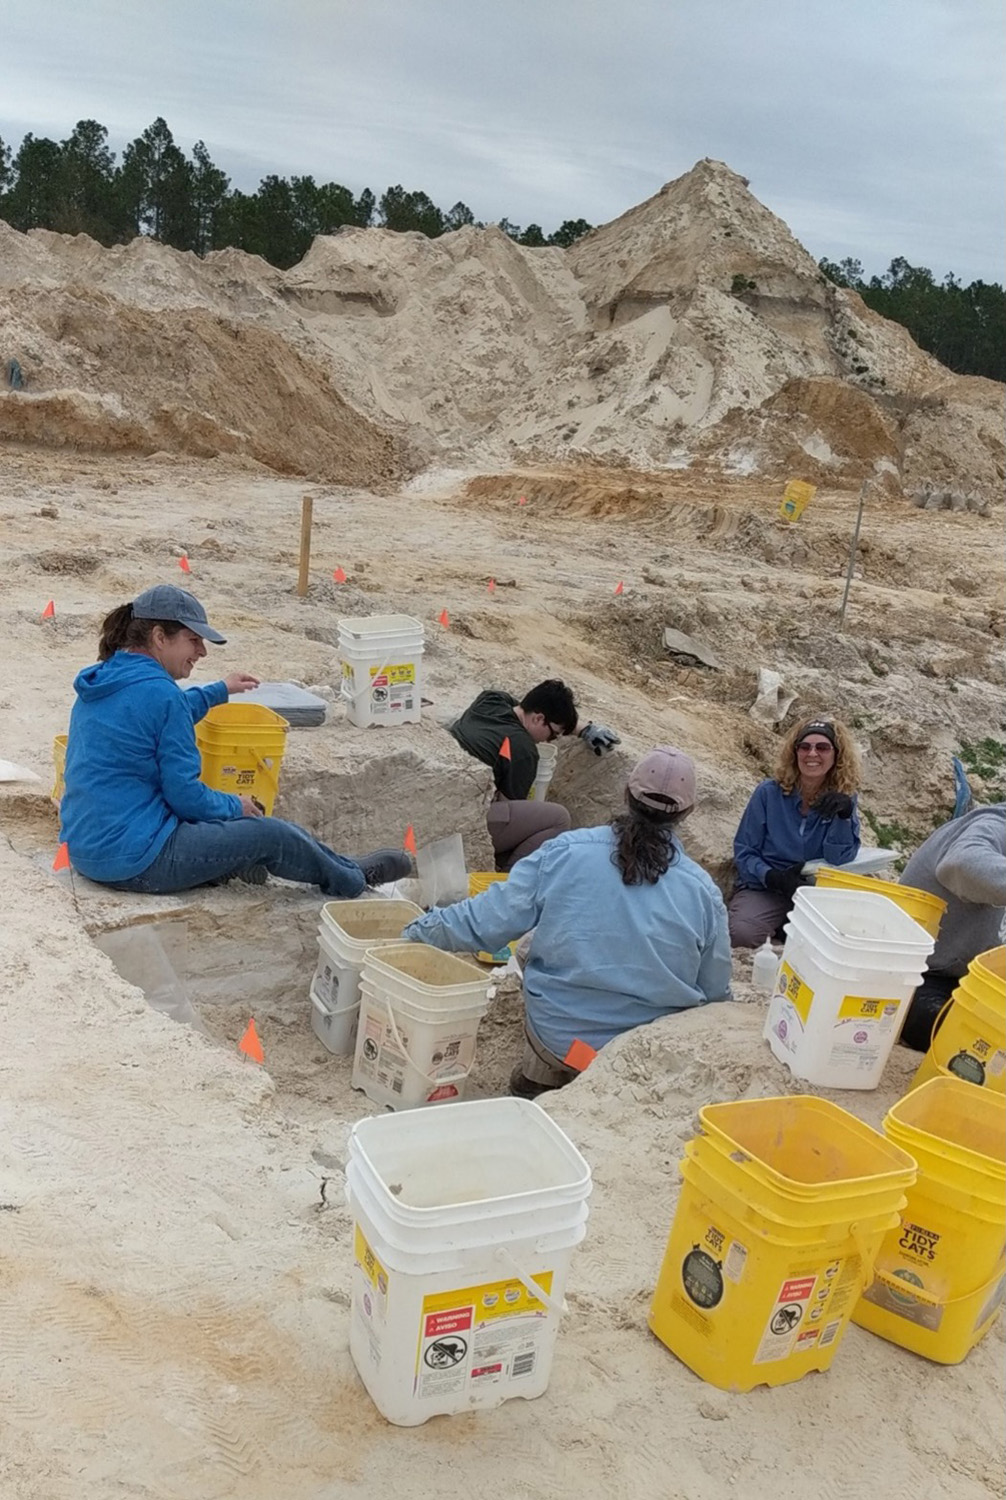 people sitting, working and taking in the dig site